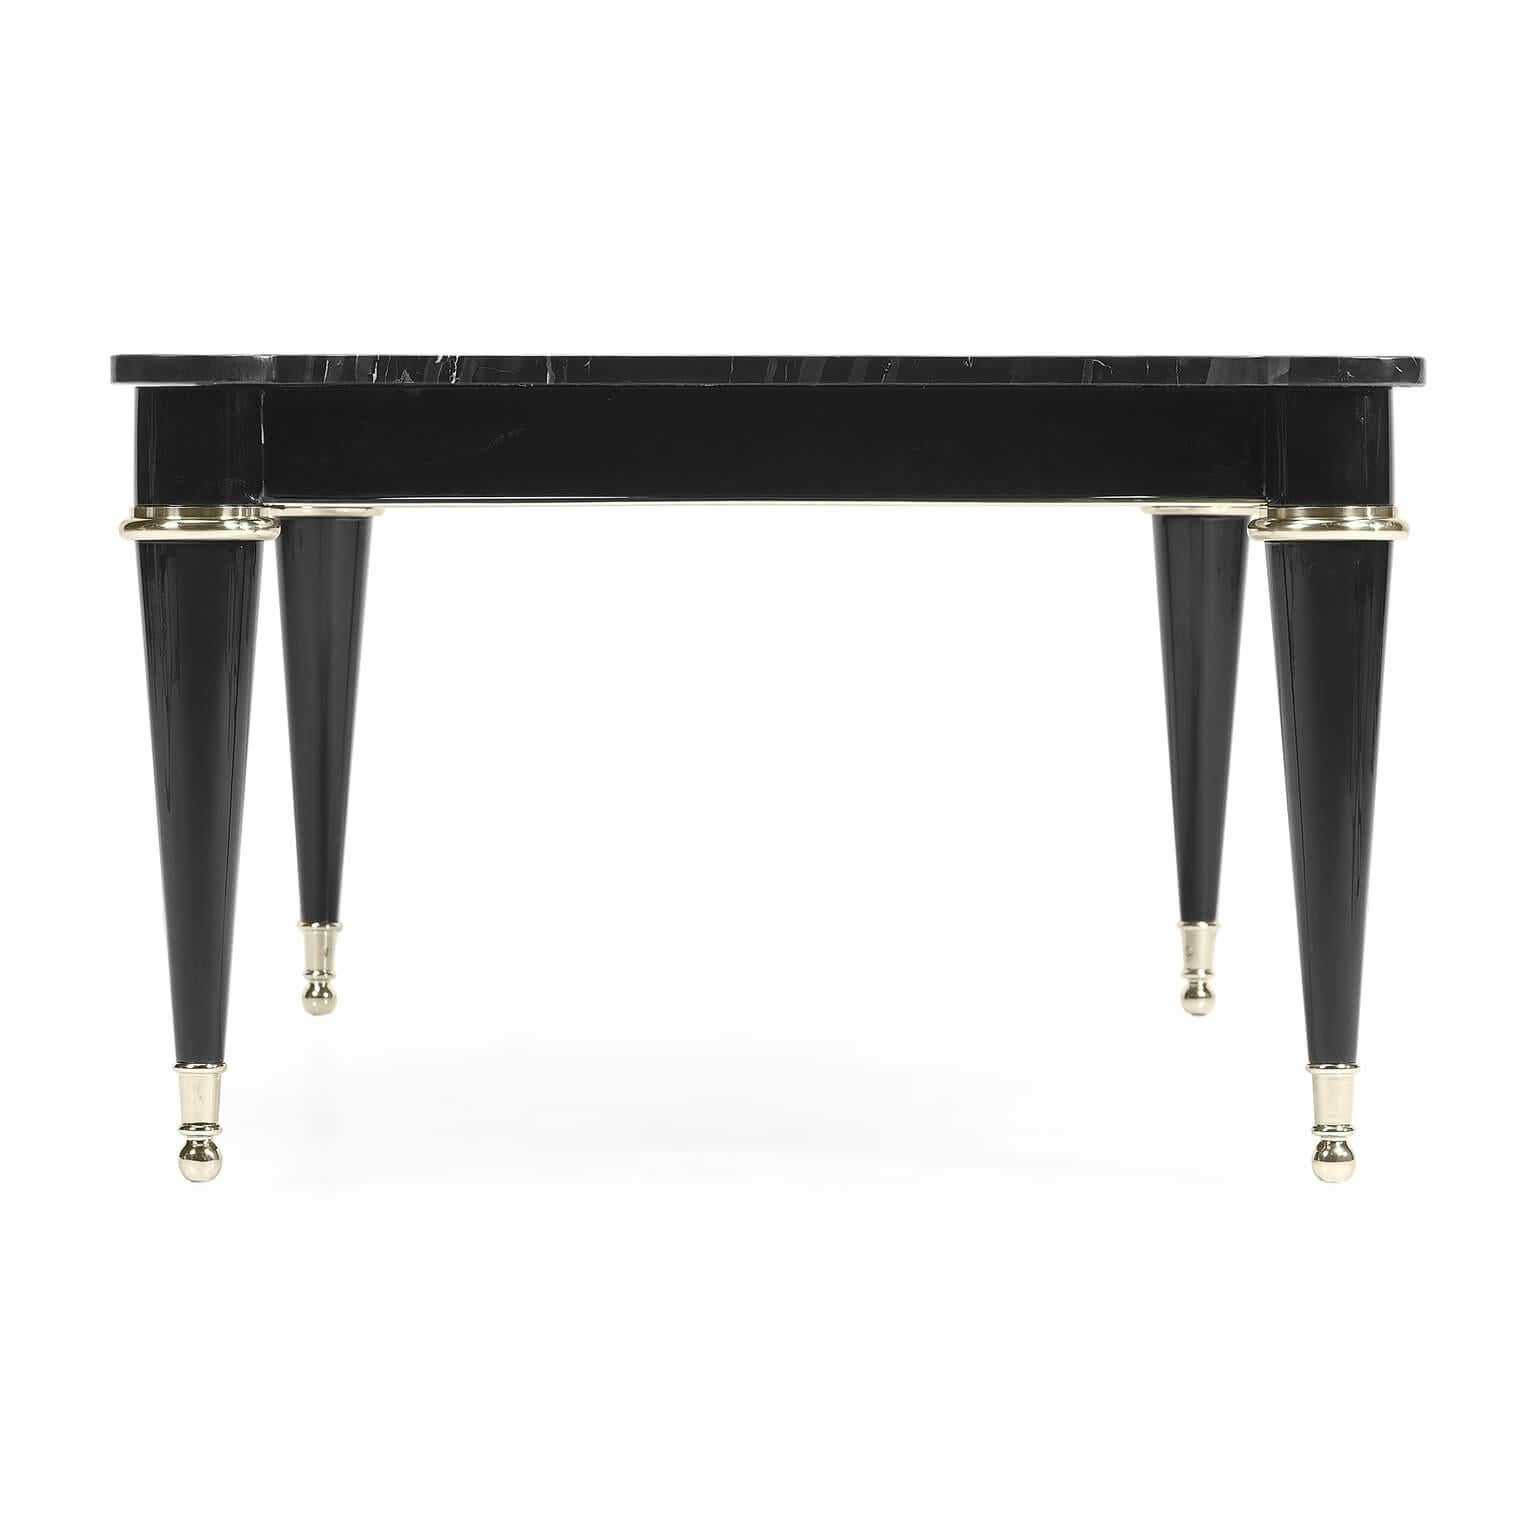 An Art Deco inspired black marble top cocktail table with silvered details, cookie-cut corners, and raised on a painted piano black base with turned and tapered legs.

Dimensions: 54